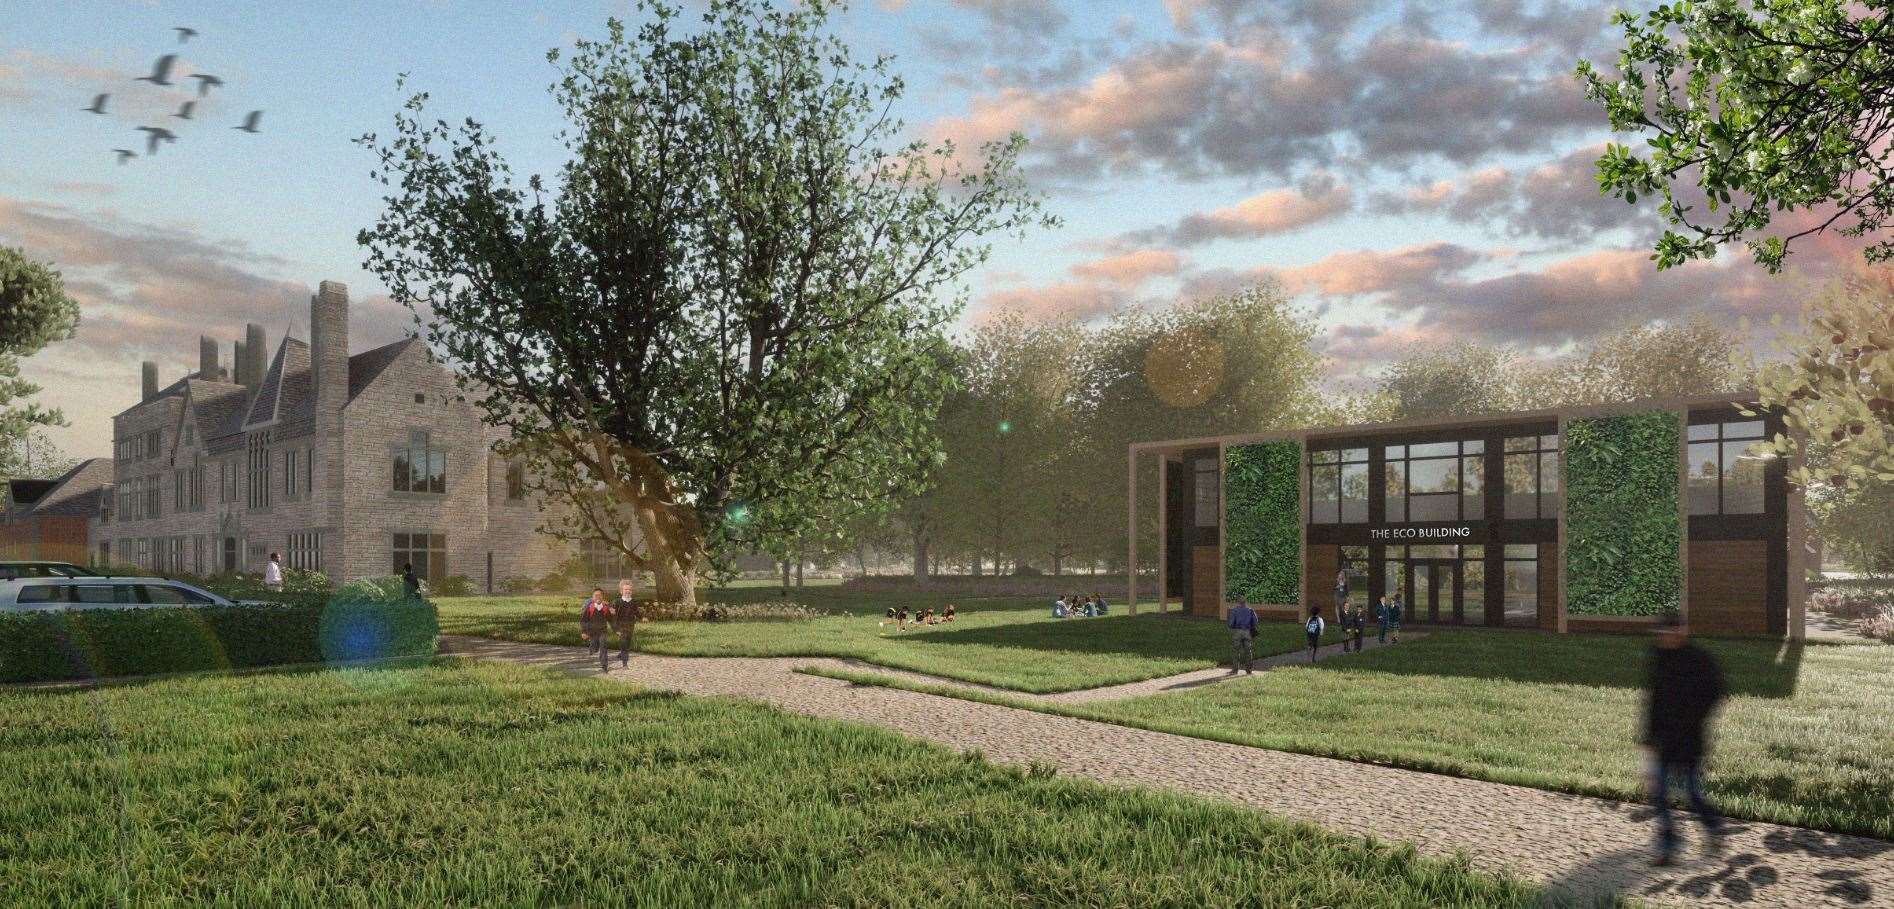 A decision on plans for a new development at Fosse Bank independent school in Tonbridge which would see 76 homes, an eco classroom and sports hall built will be made next week